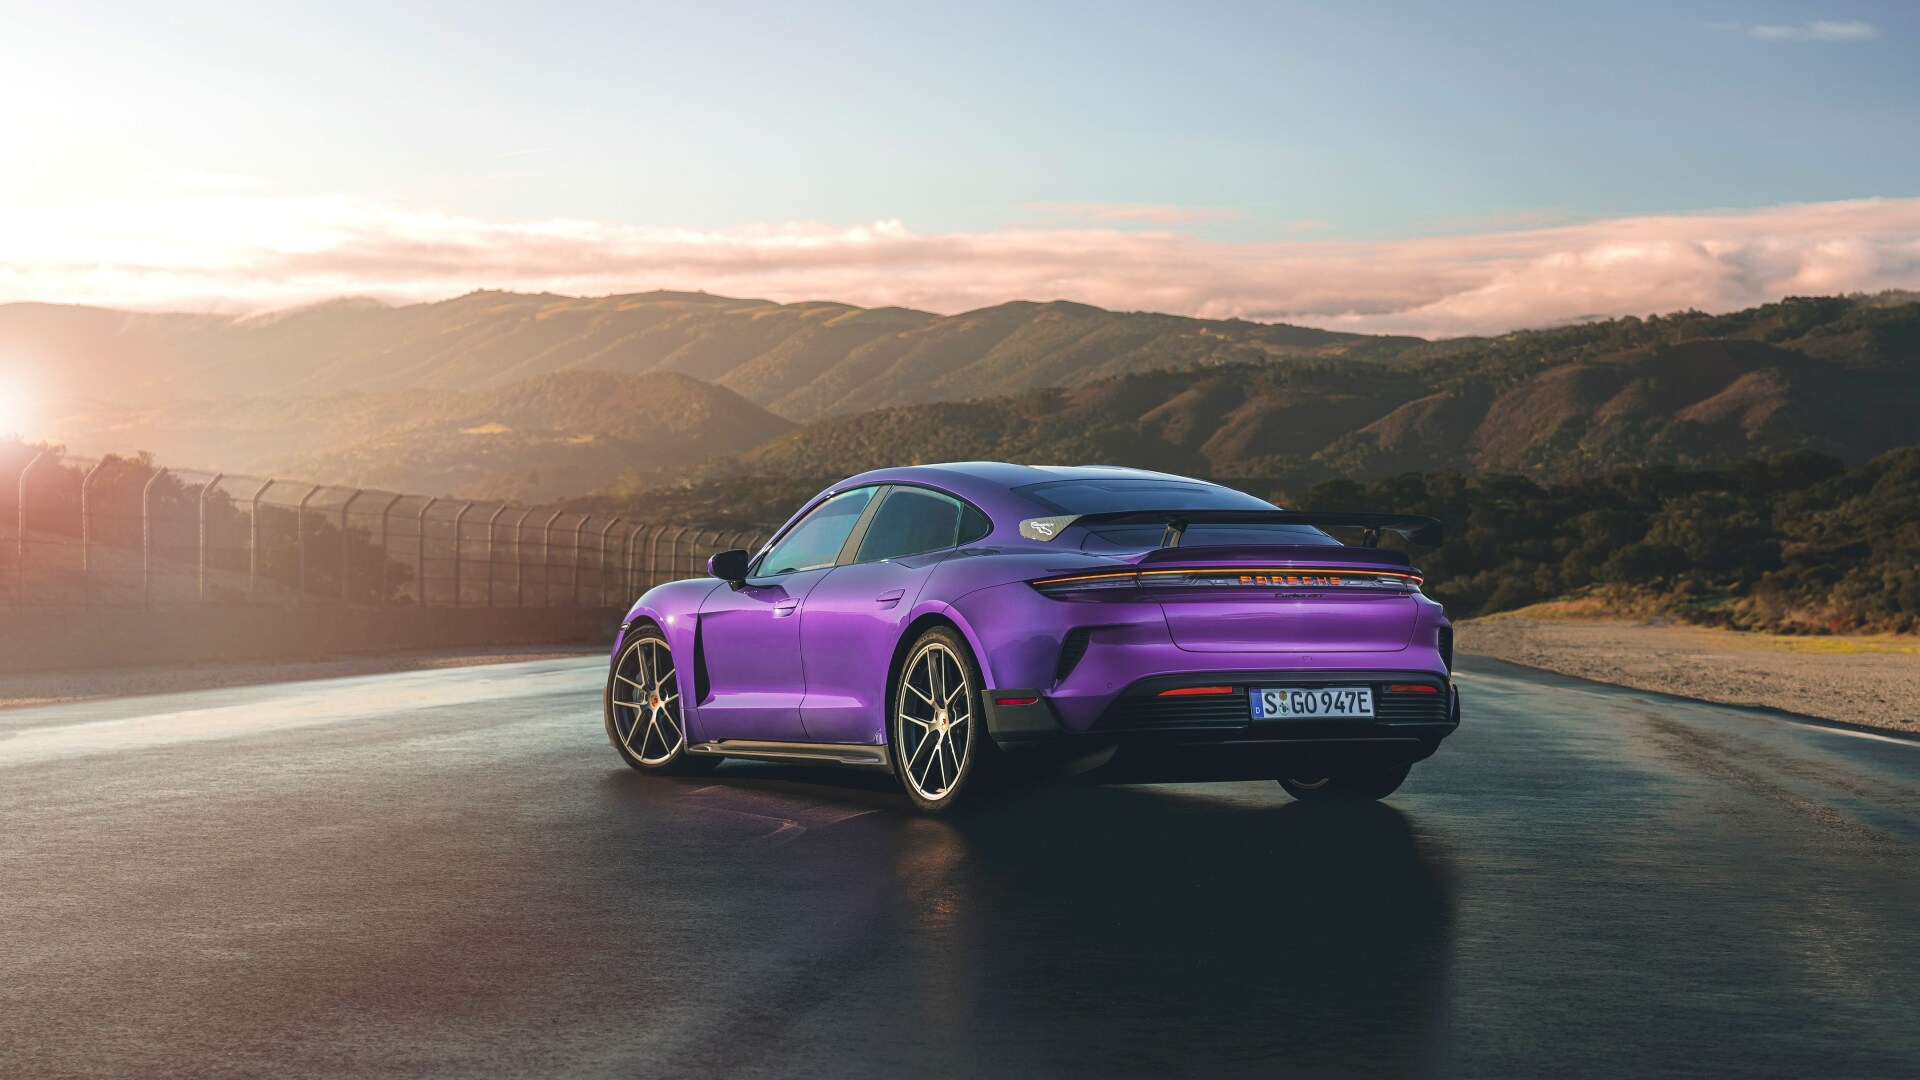 Porsche Taycan Turbo GT Setting Records And Redefining Performance Standards